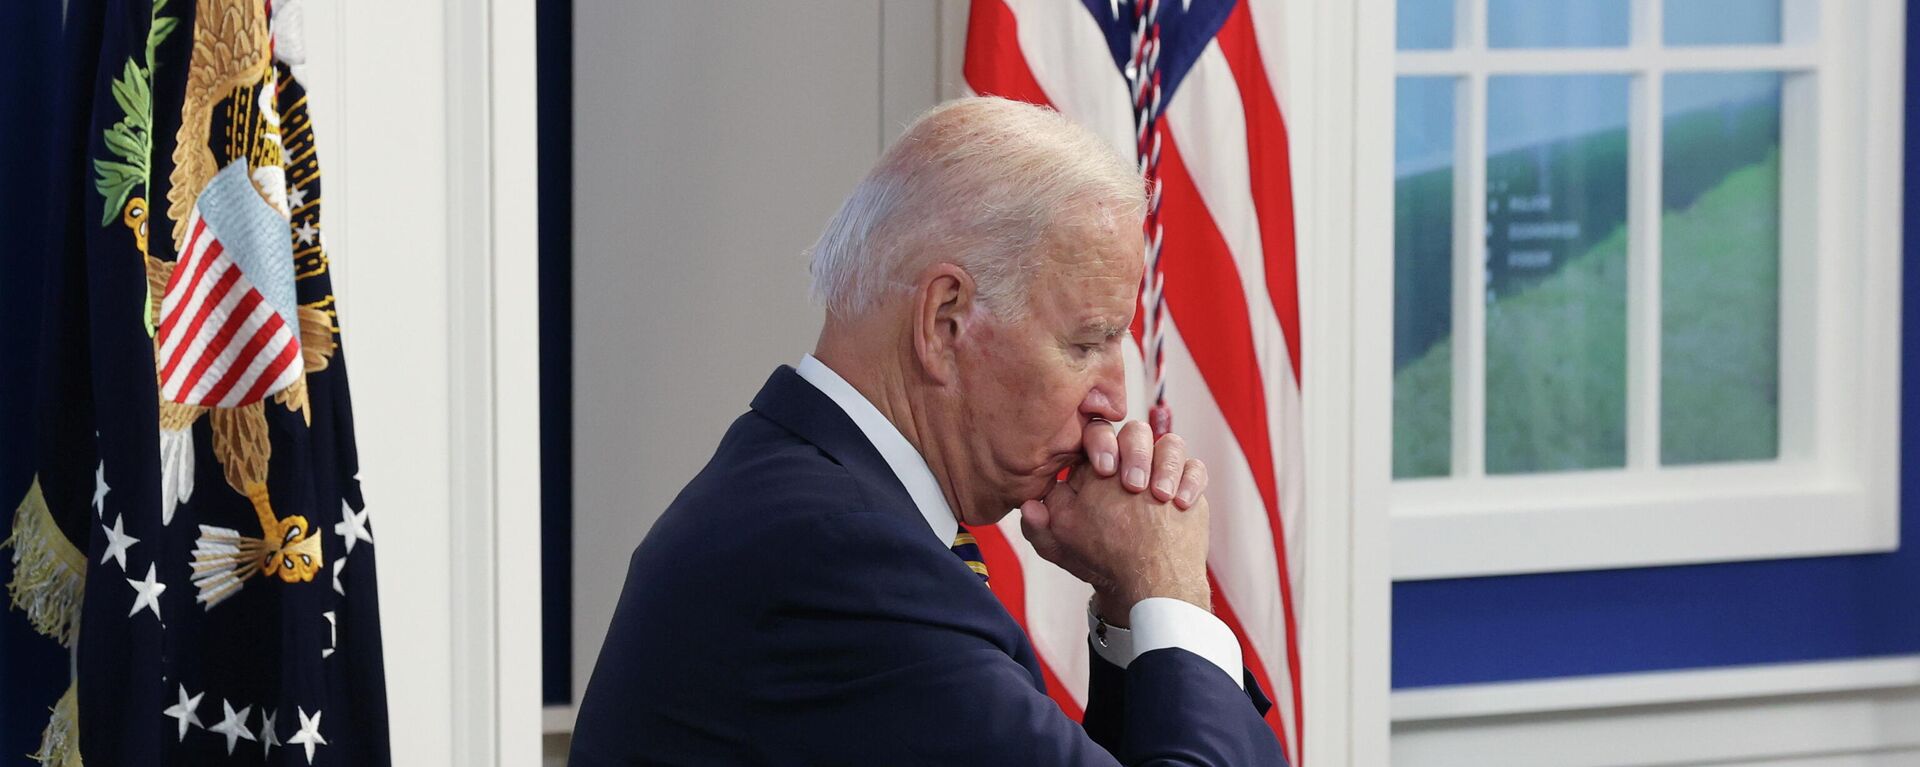 U.S. President Joe Biden participates in a meeting of the Major Economies Forum on Energy and Climate (MEF) on climate change, from an auditorium at the White House in Washington, U.S., September 17, 2021 - Sputnik International, 1920, 28.09.2021